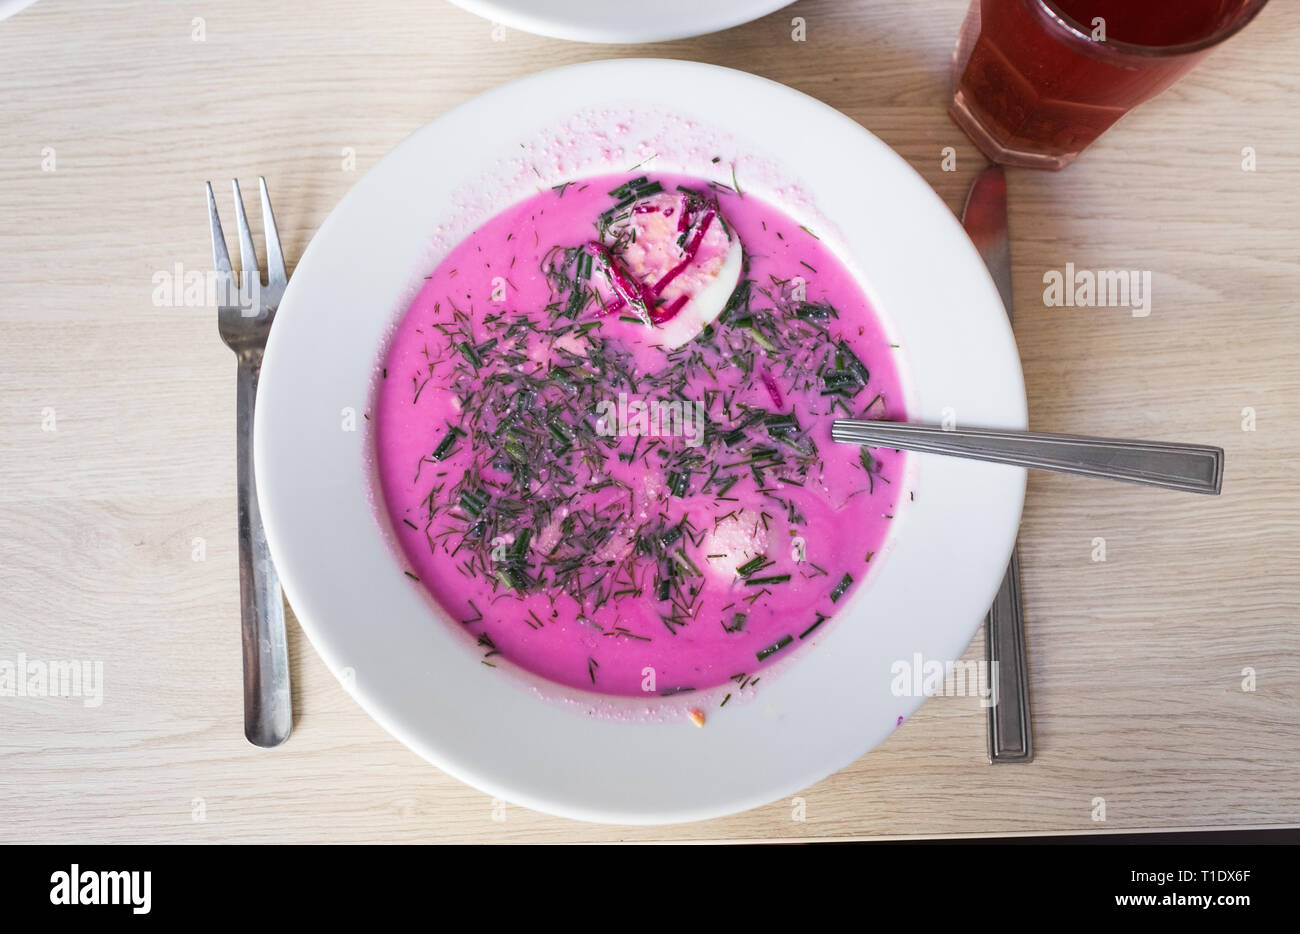 A bowl of Polish chlodnik, a delicious cold soup made with beetroot, sour cream, hard boiled egg, and fresh herbs, served at Bar Bambino, a milk bar. Stock Photo